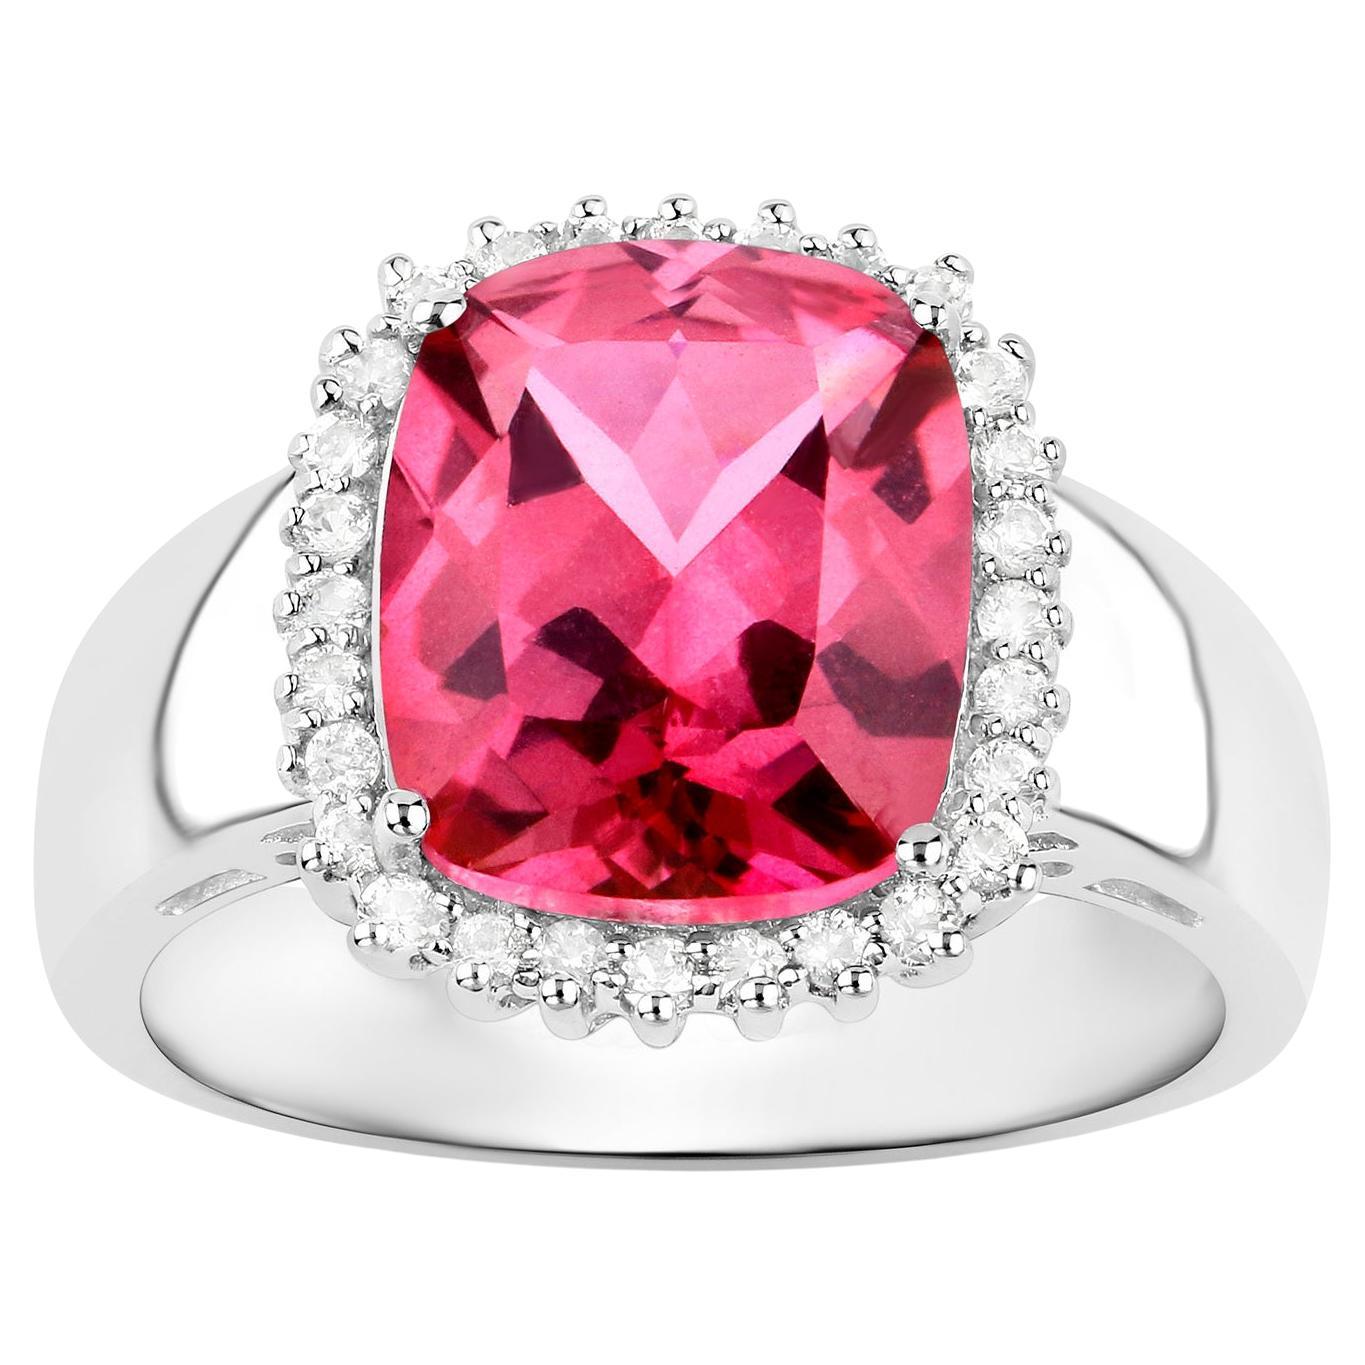 Hot Pink Topaz Ring White Topaz Halo 4.4 Carats For Sale